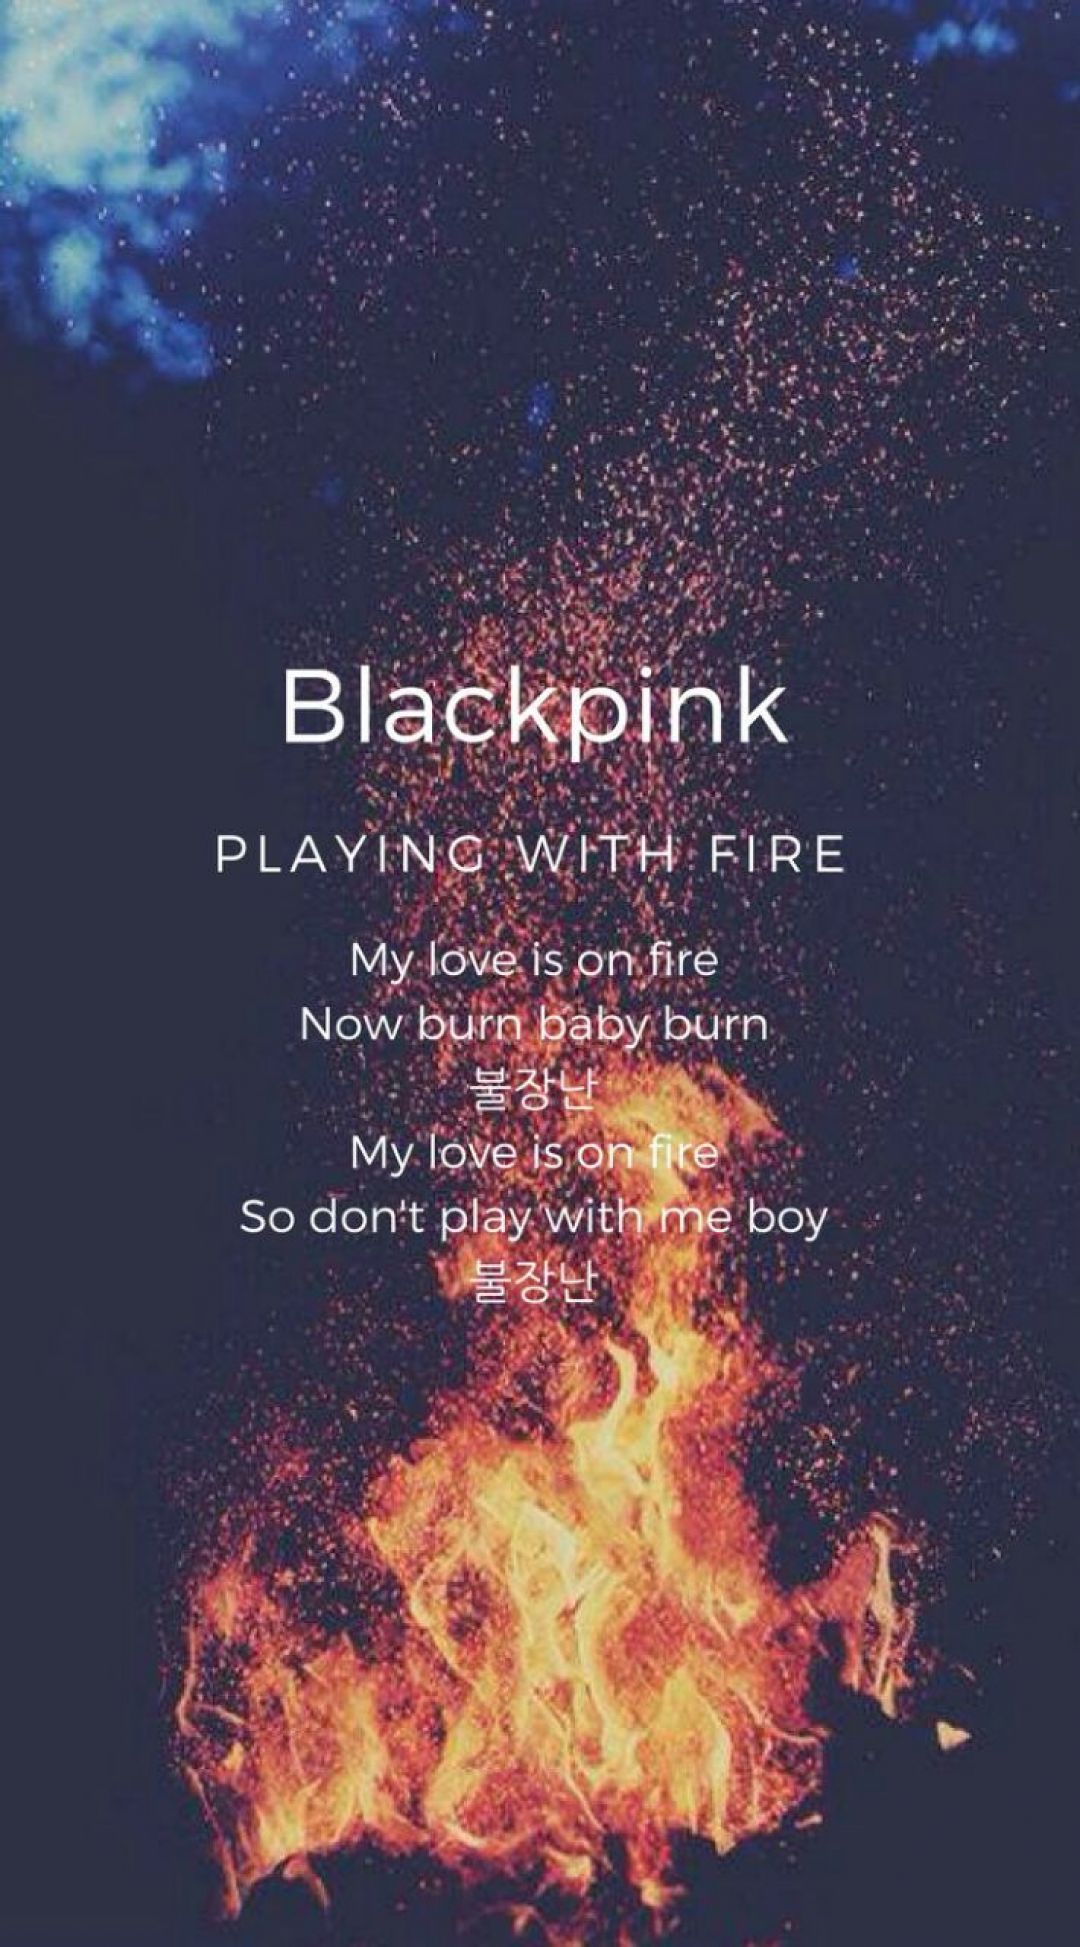 Playing with fire is a song by Blackpink - Fire